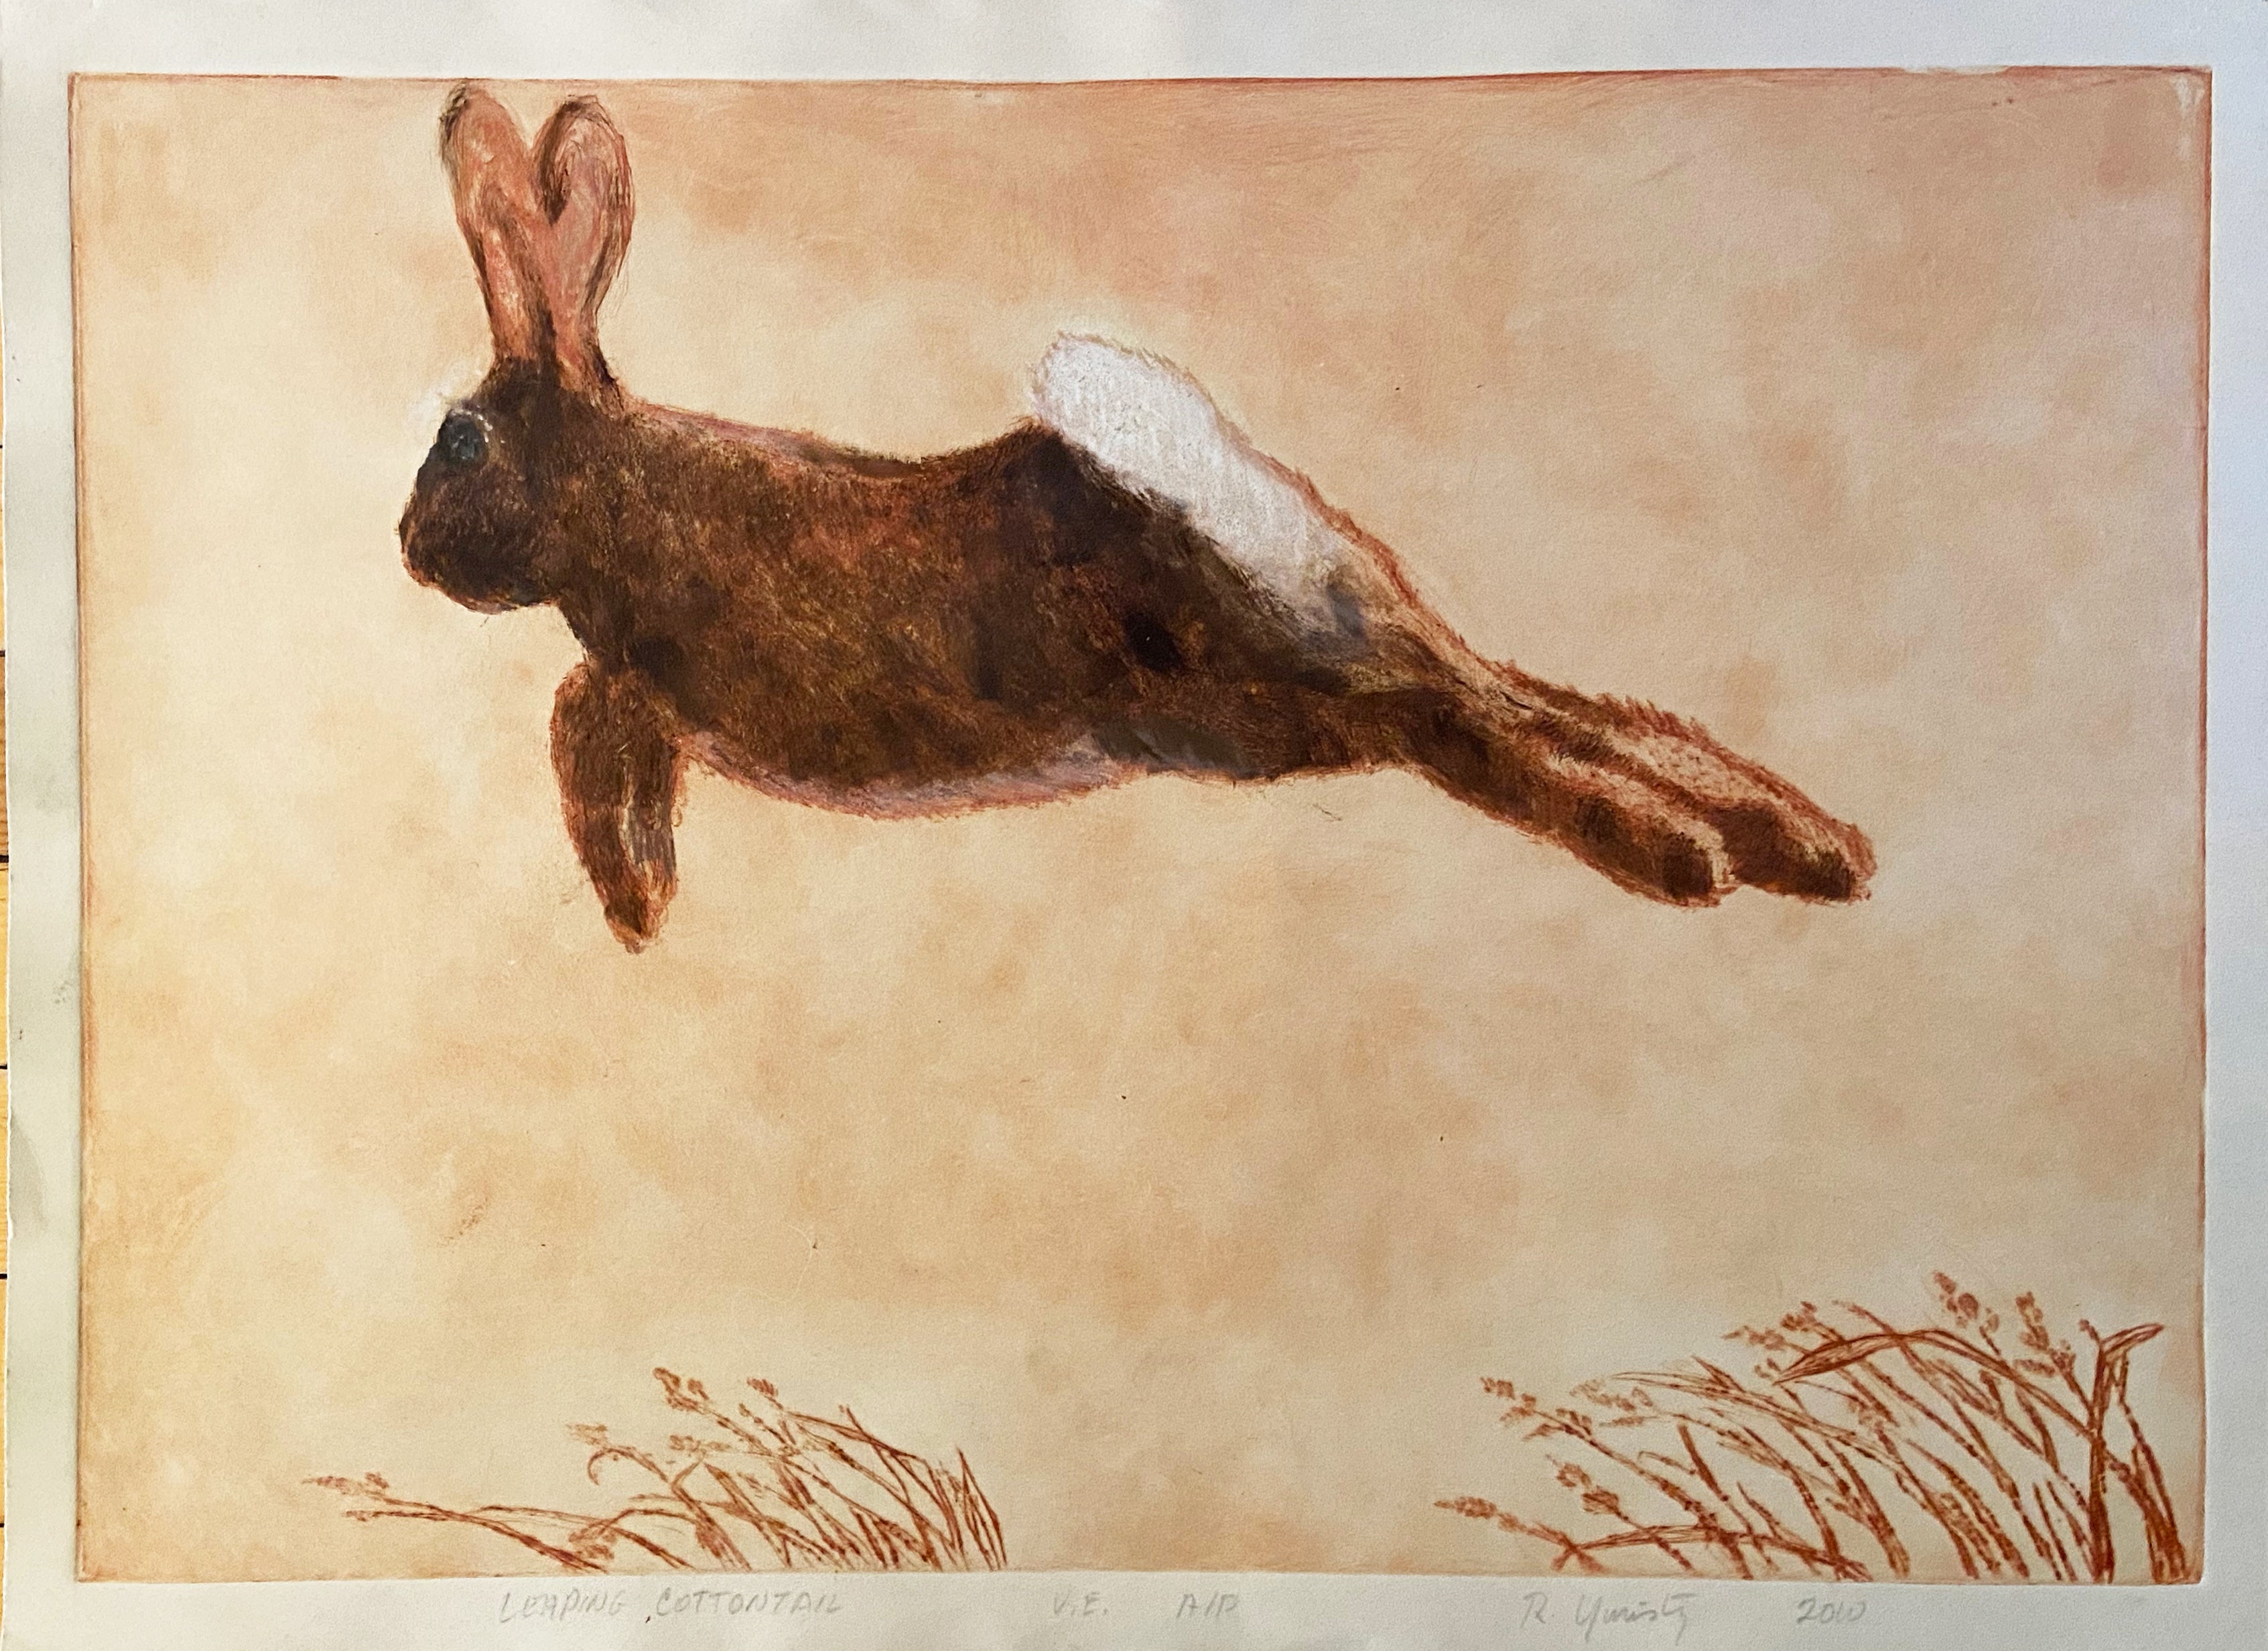 Leaping Cottontail